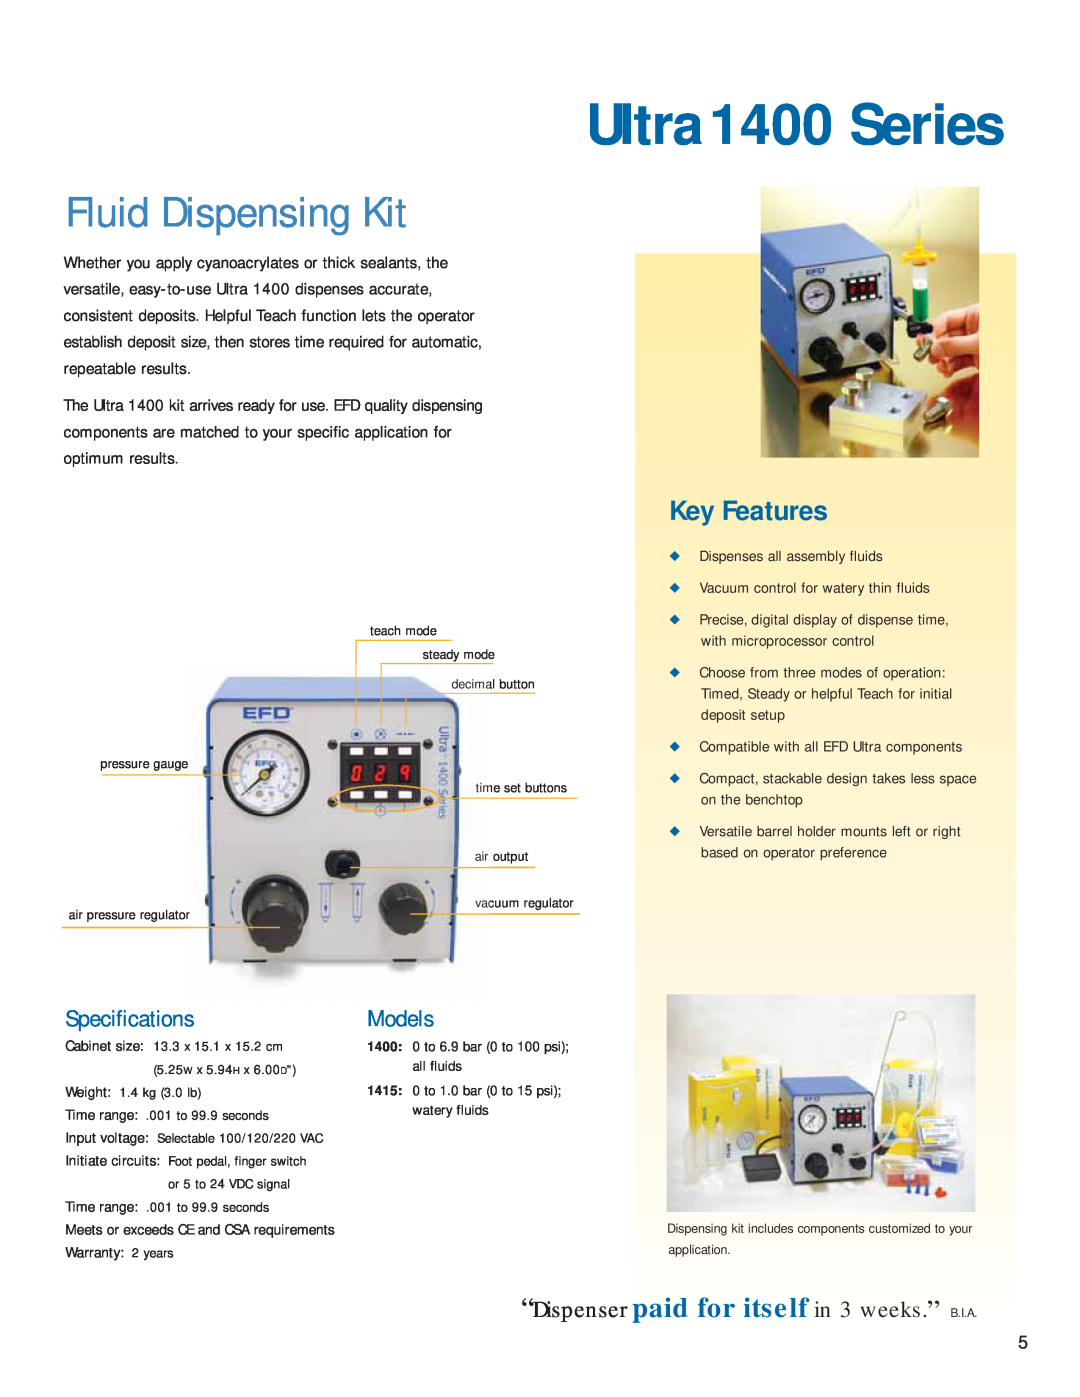 Ultra Products v051806 Ultra1400 Series, Fluid Dispensing Kit, “Dispenser paid for itself in 3 weeks.” B.I.A, Key Features 